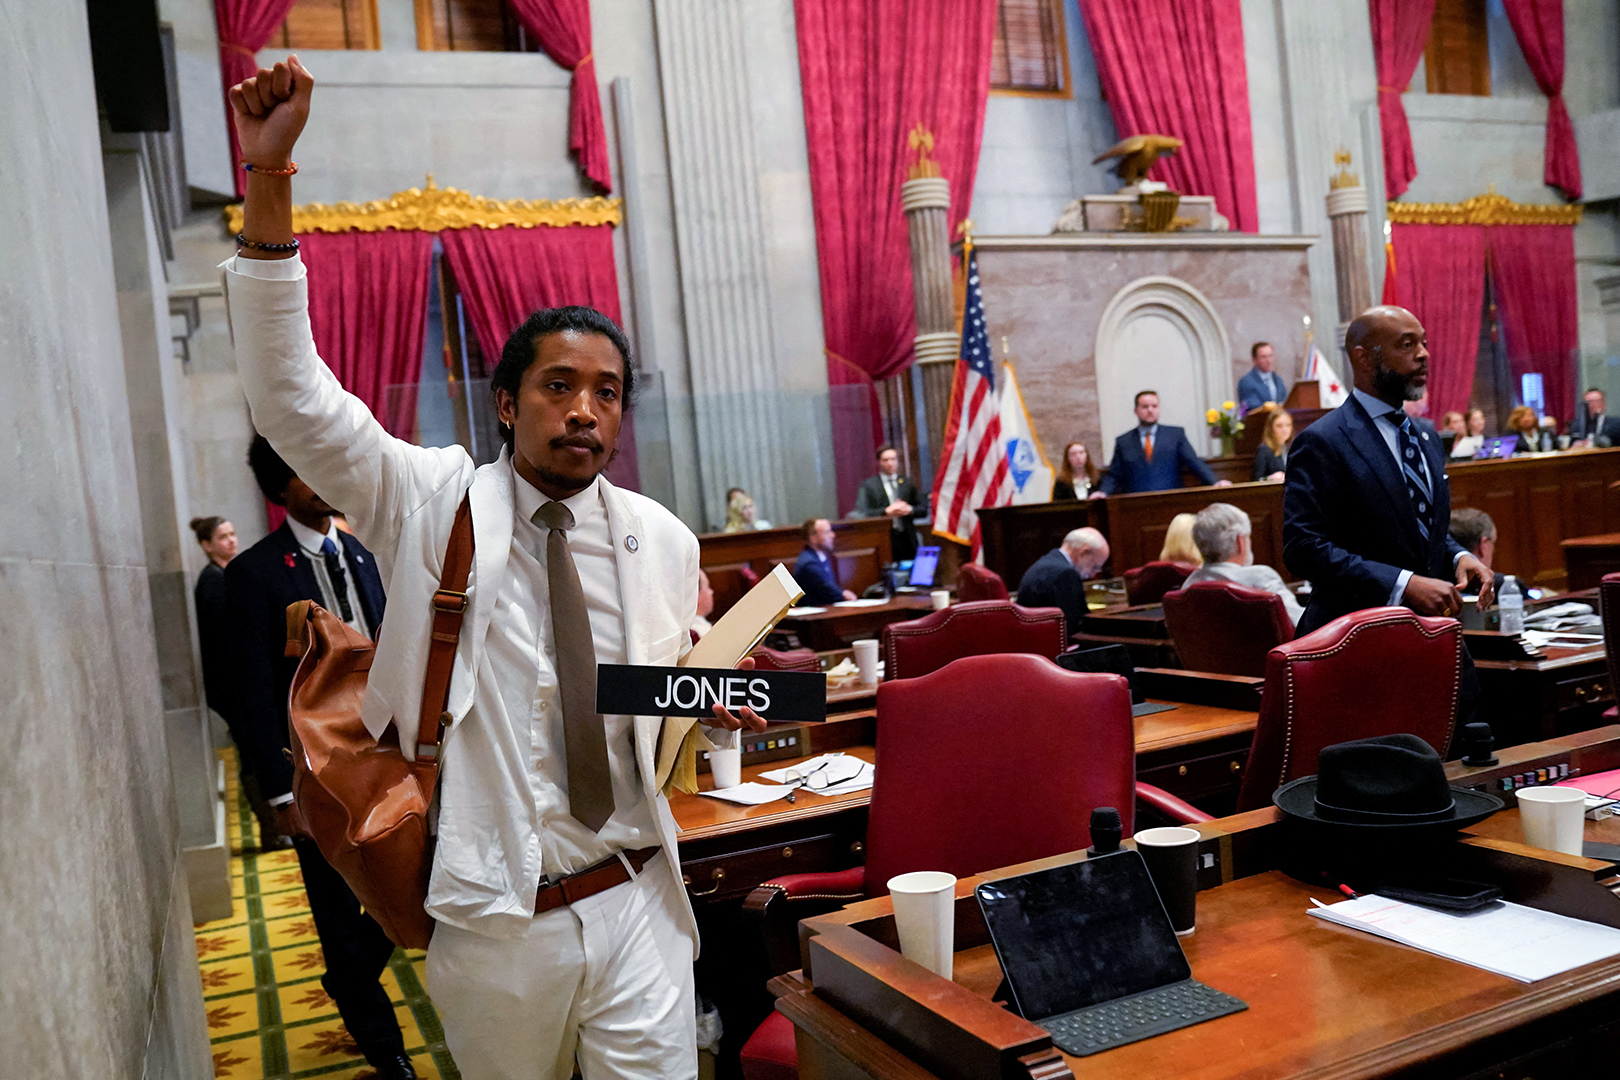 Justin Jones carries his name tag after a vote at the Tennessee House of Representatives to expel him for his role in a gun control demonstration at the statehouse in Nashville.